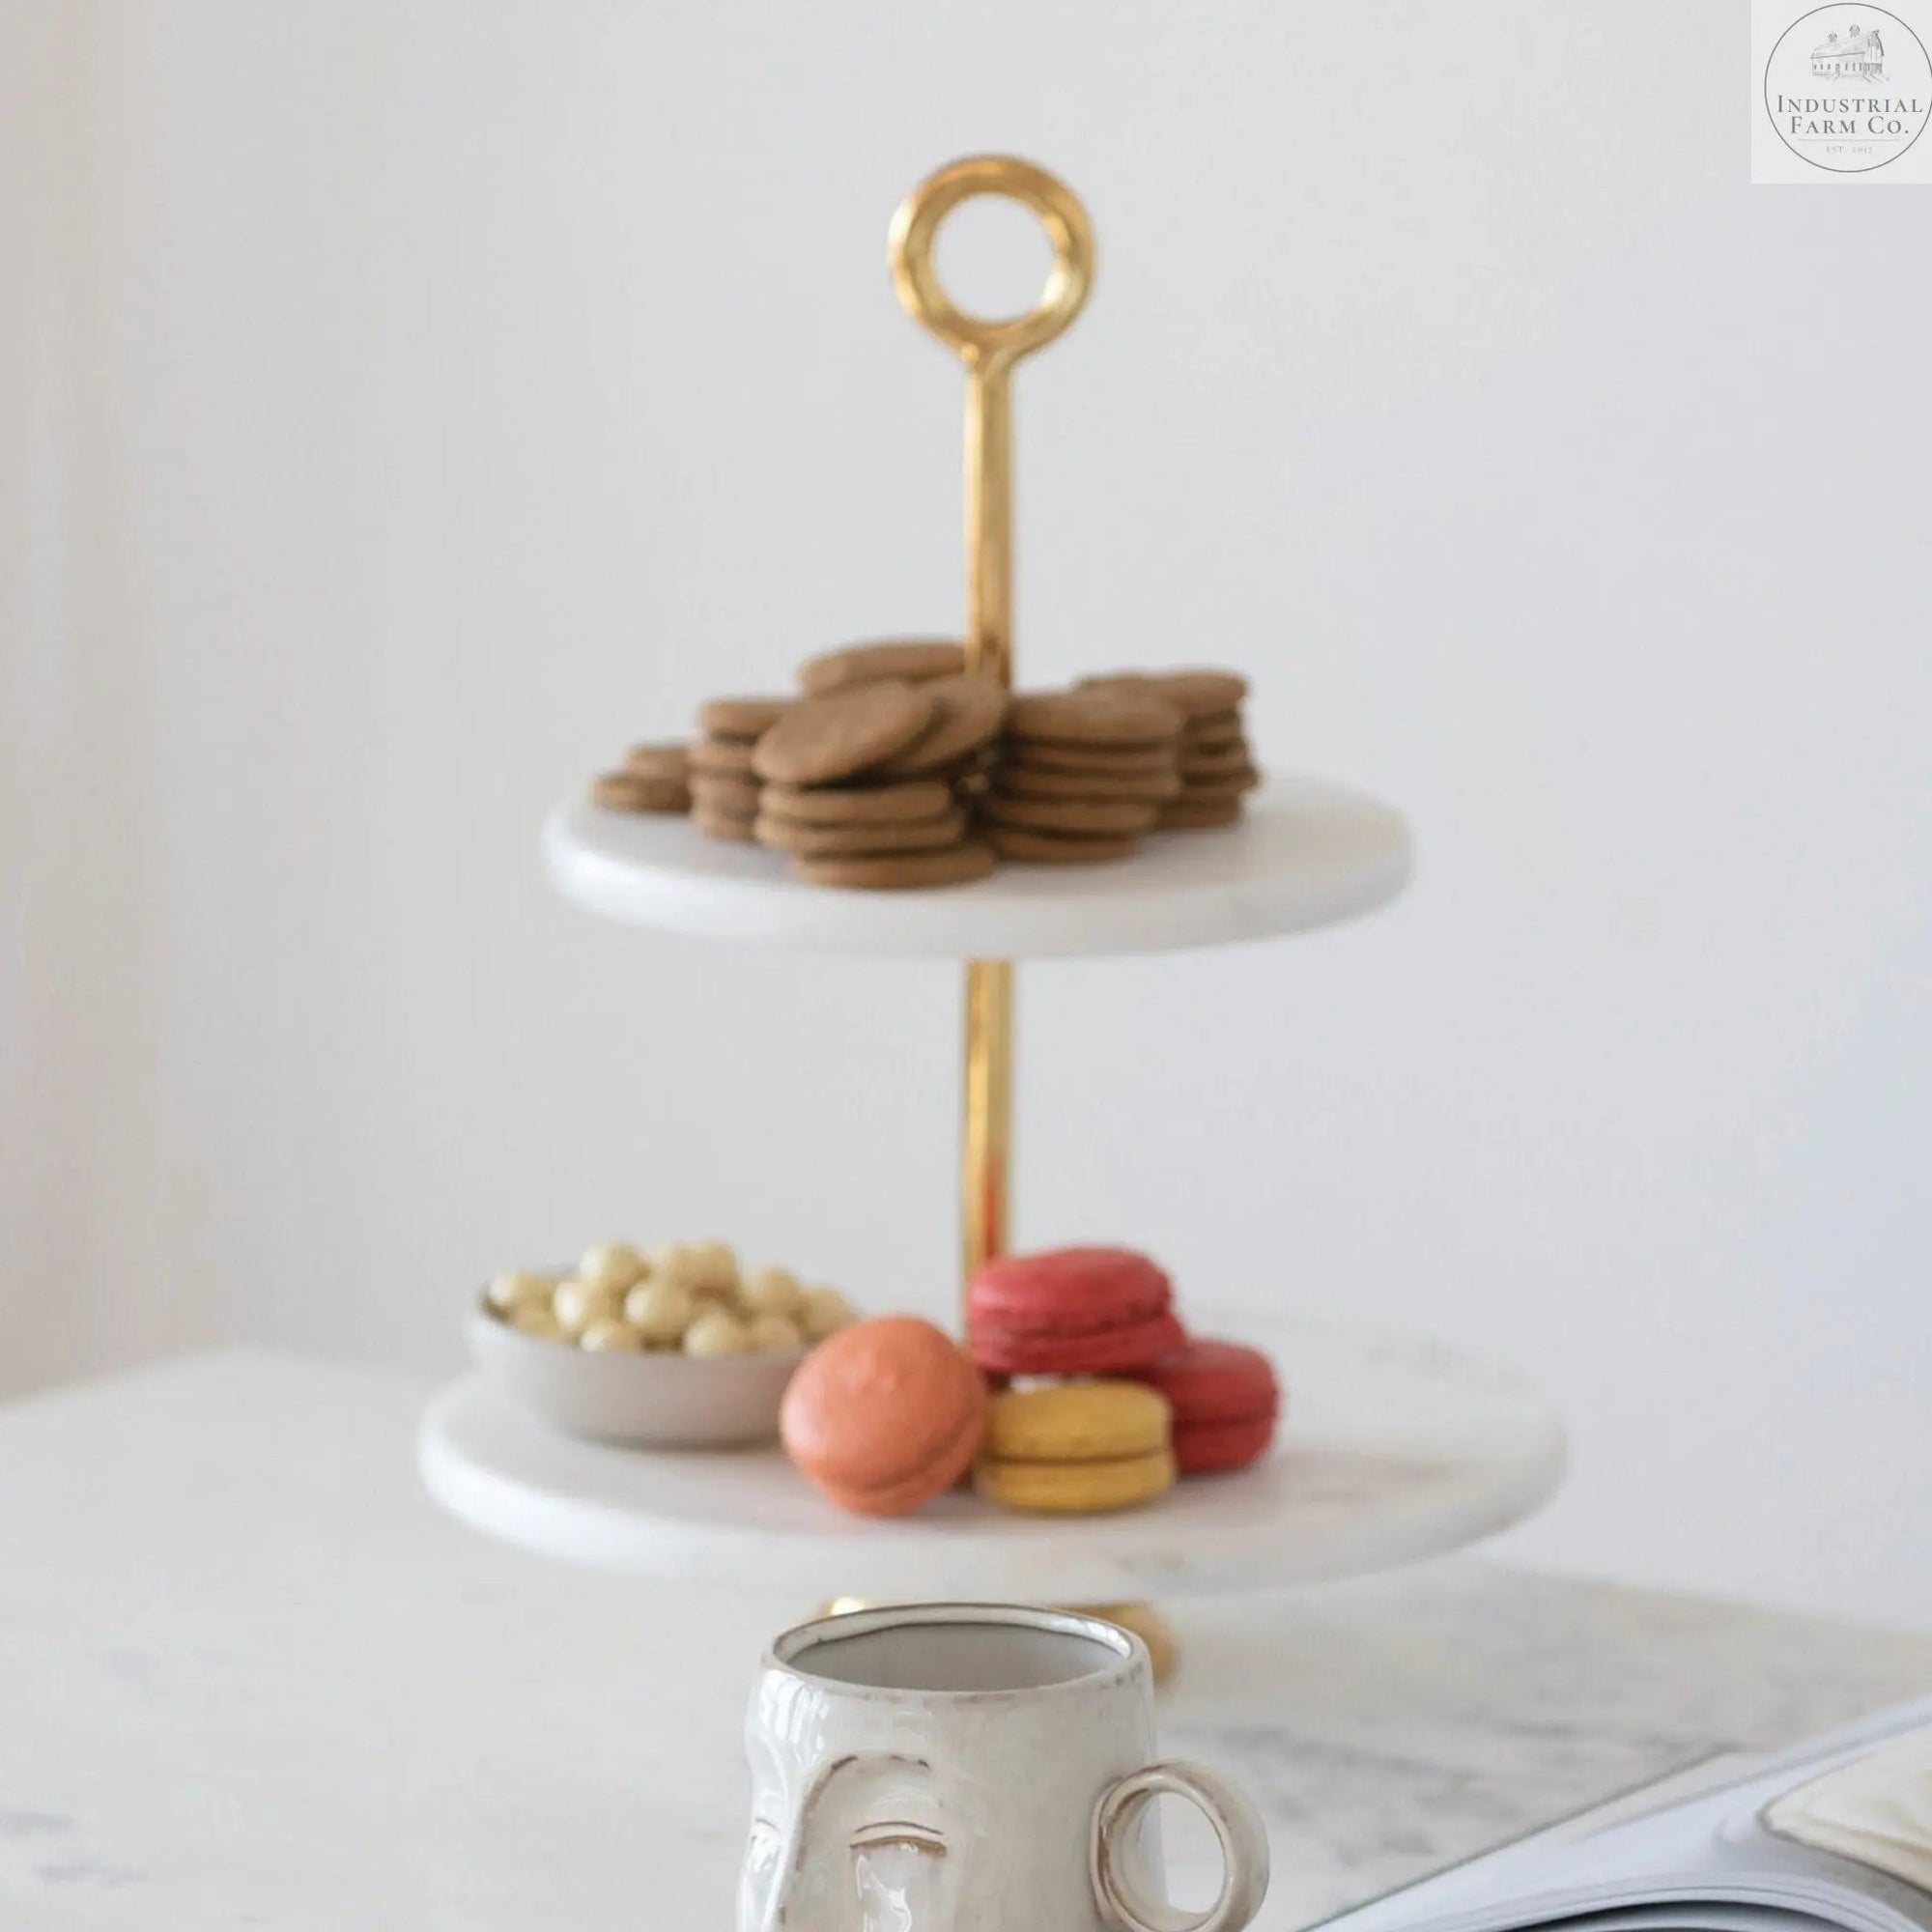 Modern Tiered Serving Tray | Industrial Farm Co